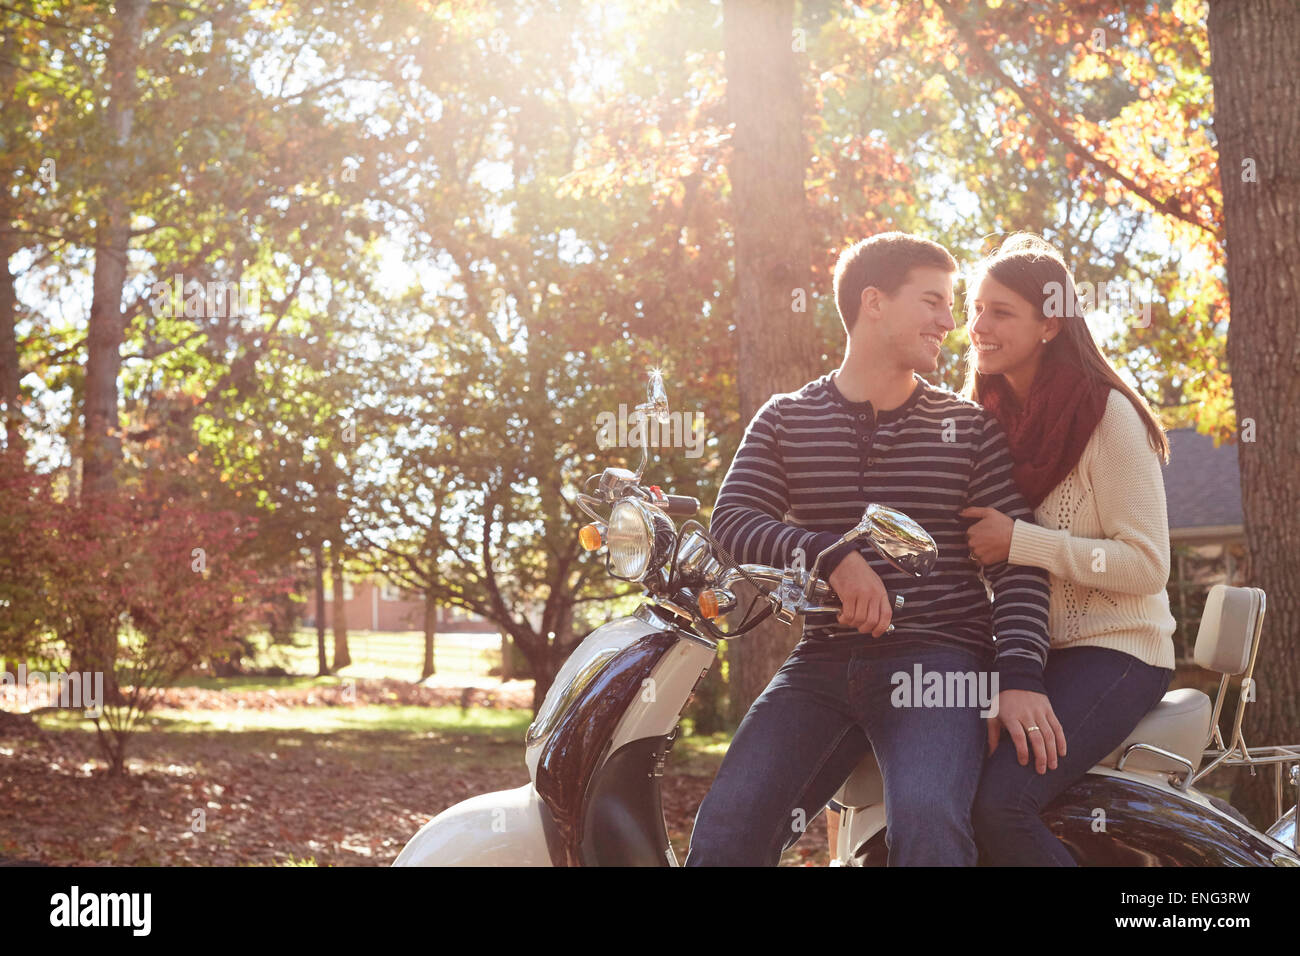 Couple sitting on scooter in park Stock Photo